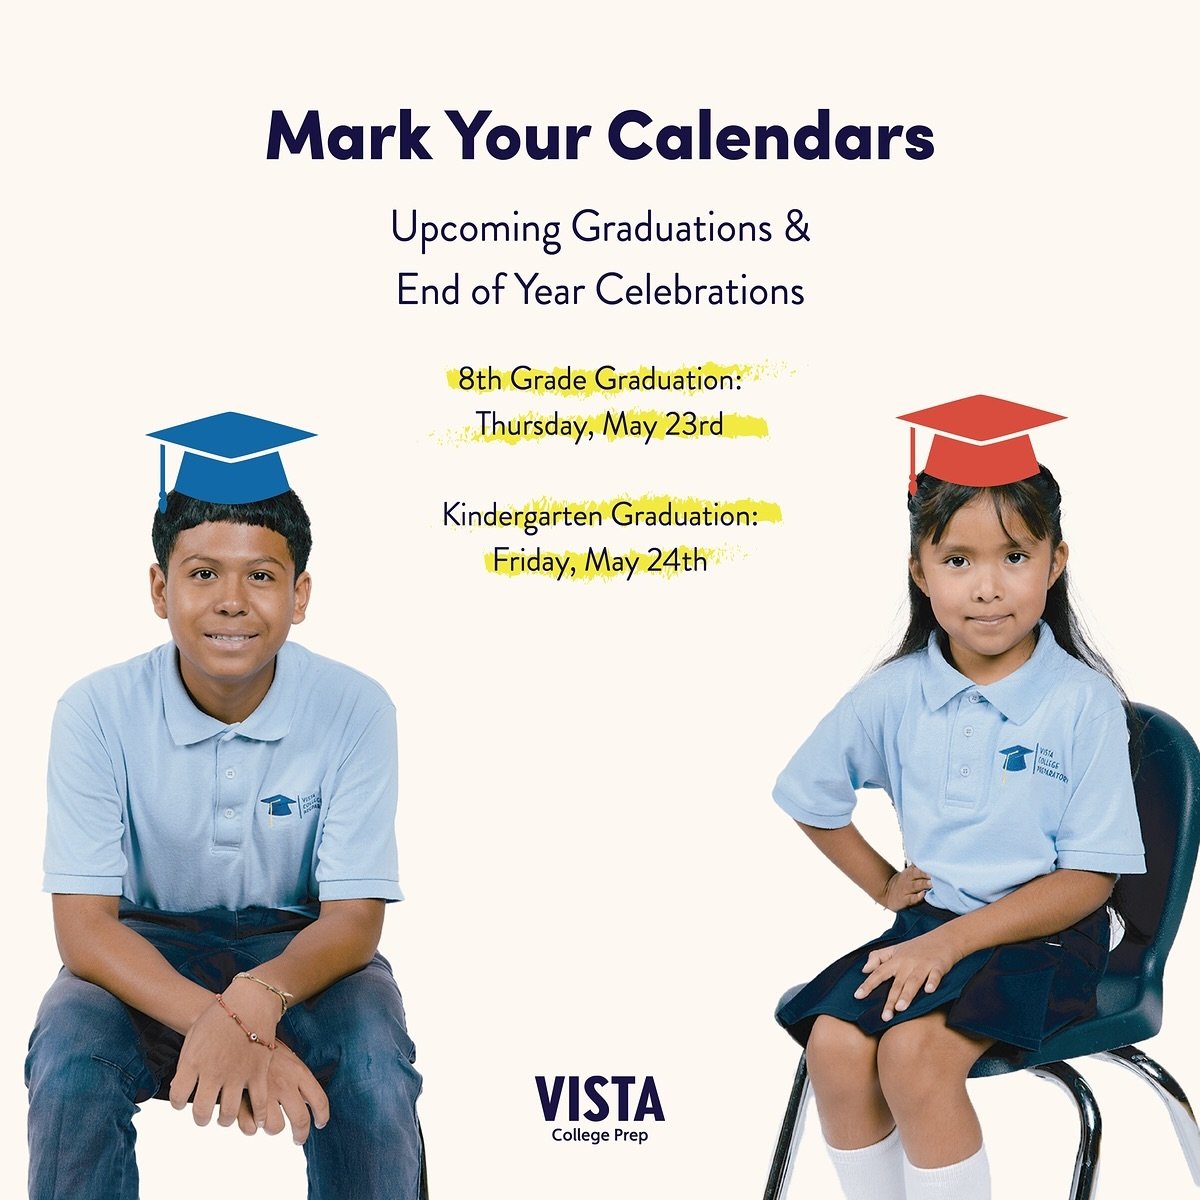 Mark your calendars for the upcoming graduations and end of year celebrations: 
- 8th grade graduation is happening on the evening of Thursday, May 23 
- Kindergarten Graduation is happening on Friday, May 24th 

Check in with your teacher and front 